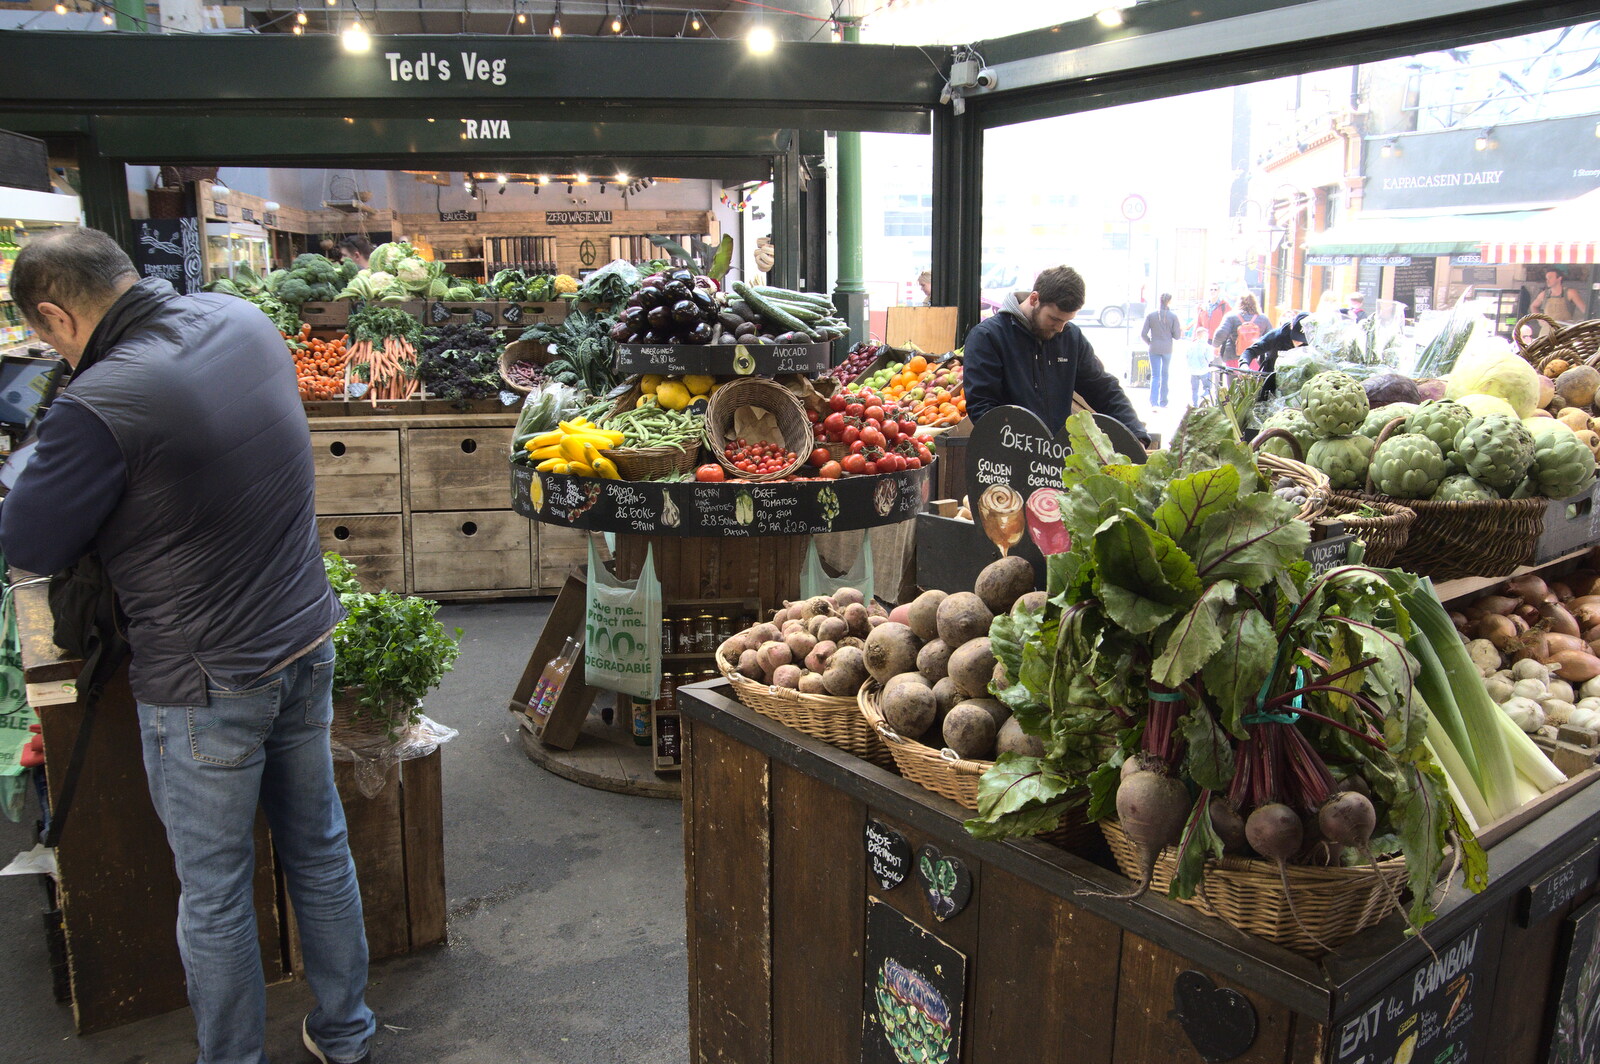 A Walk Around the South Bank, London - 25th March 2022: Ted's Veg in Borough Market